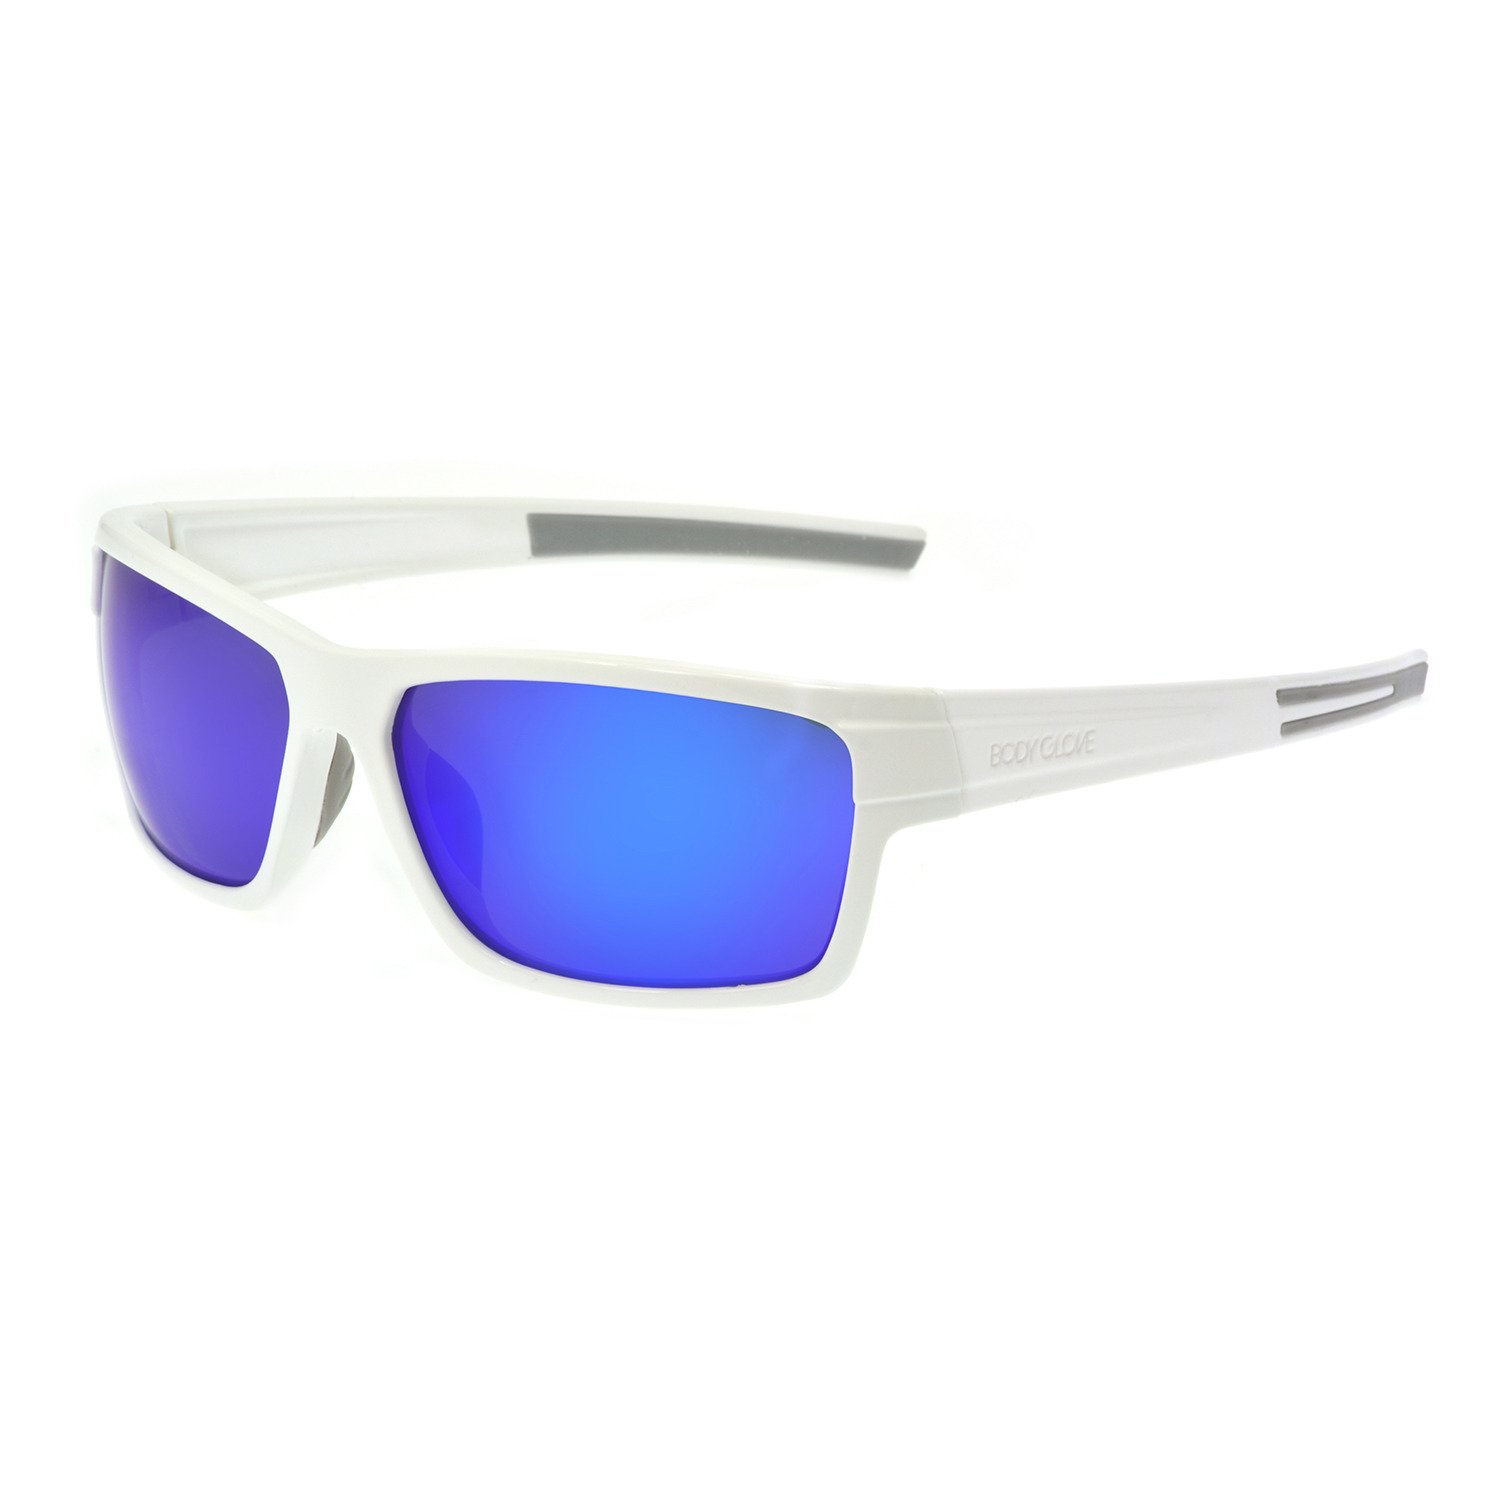 Body Glove Vapor 18 Polarized Sunglasses                                                                                         - view number 1 selected